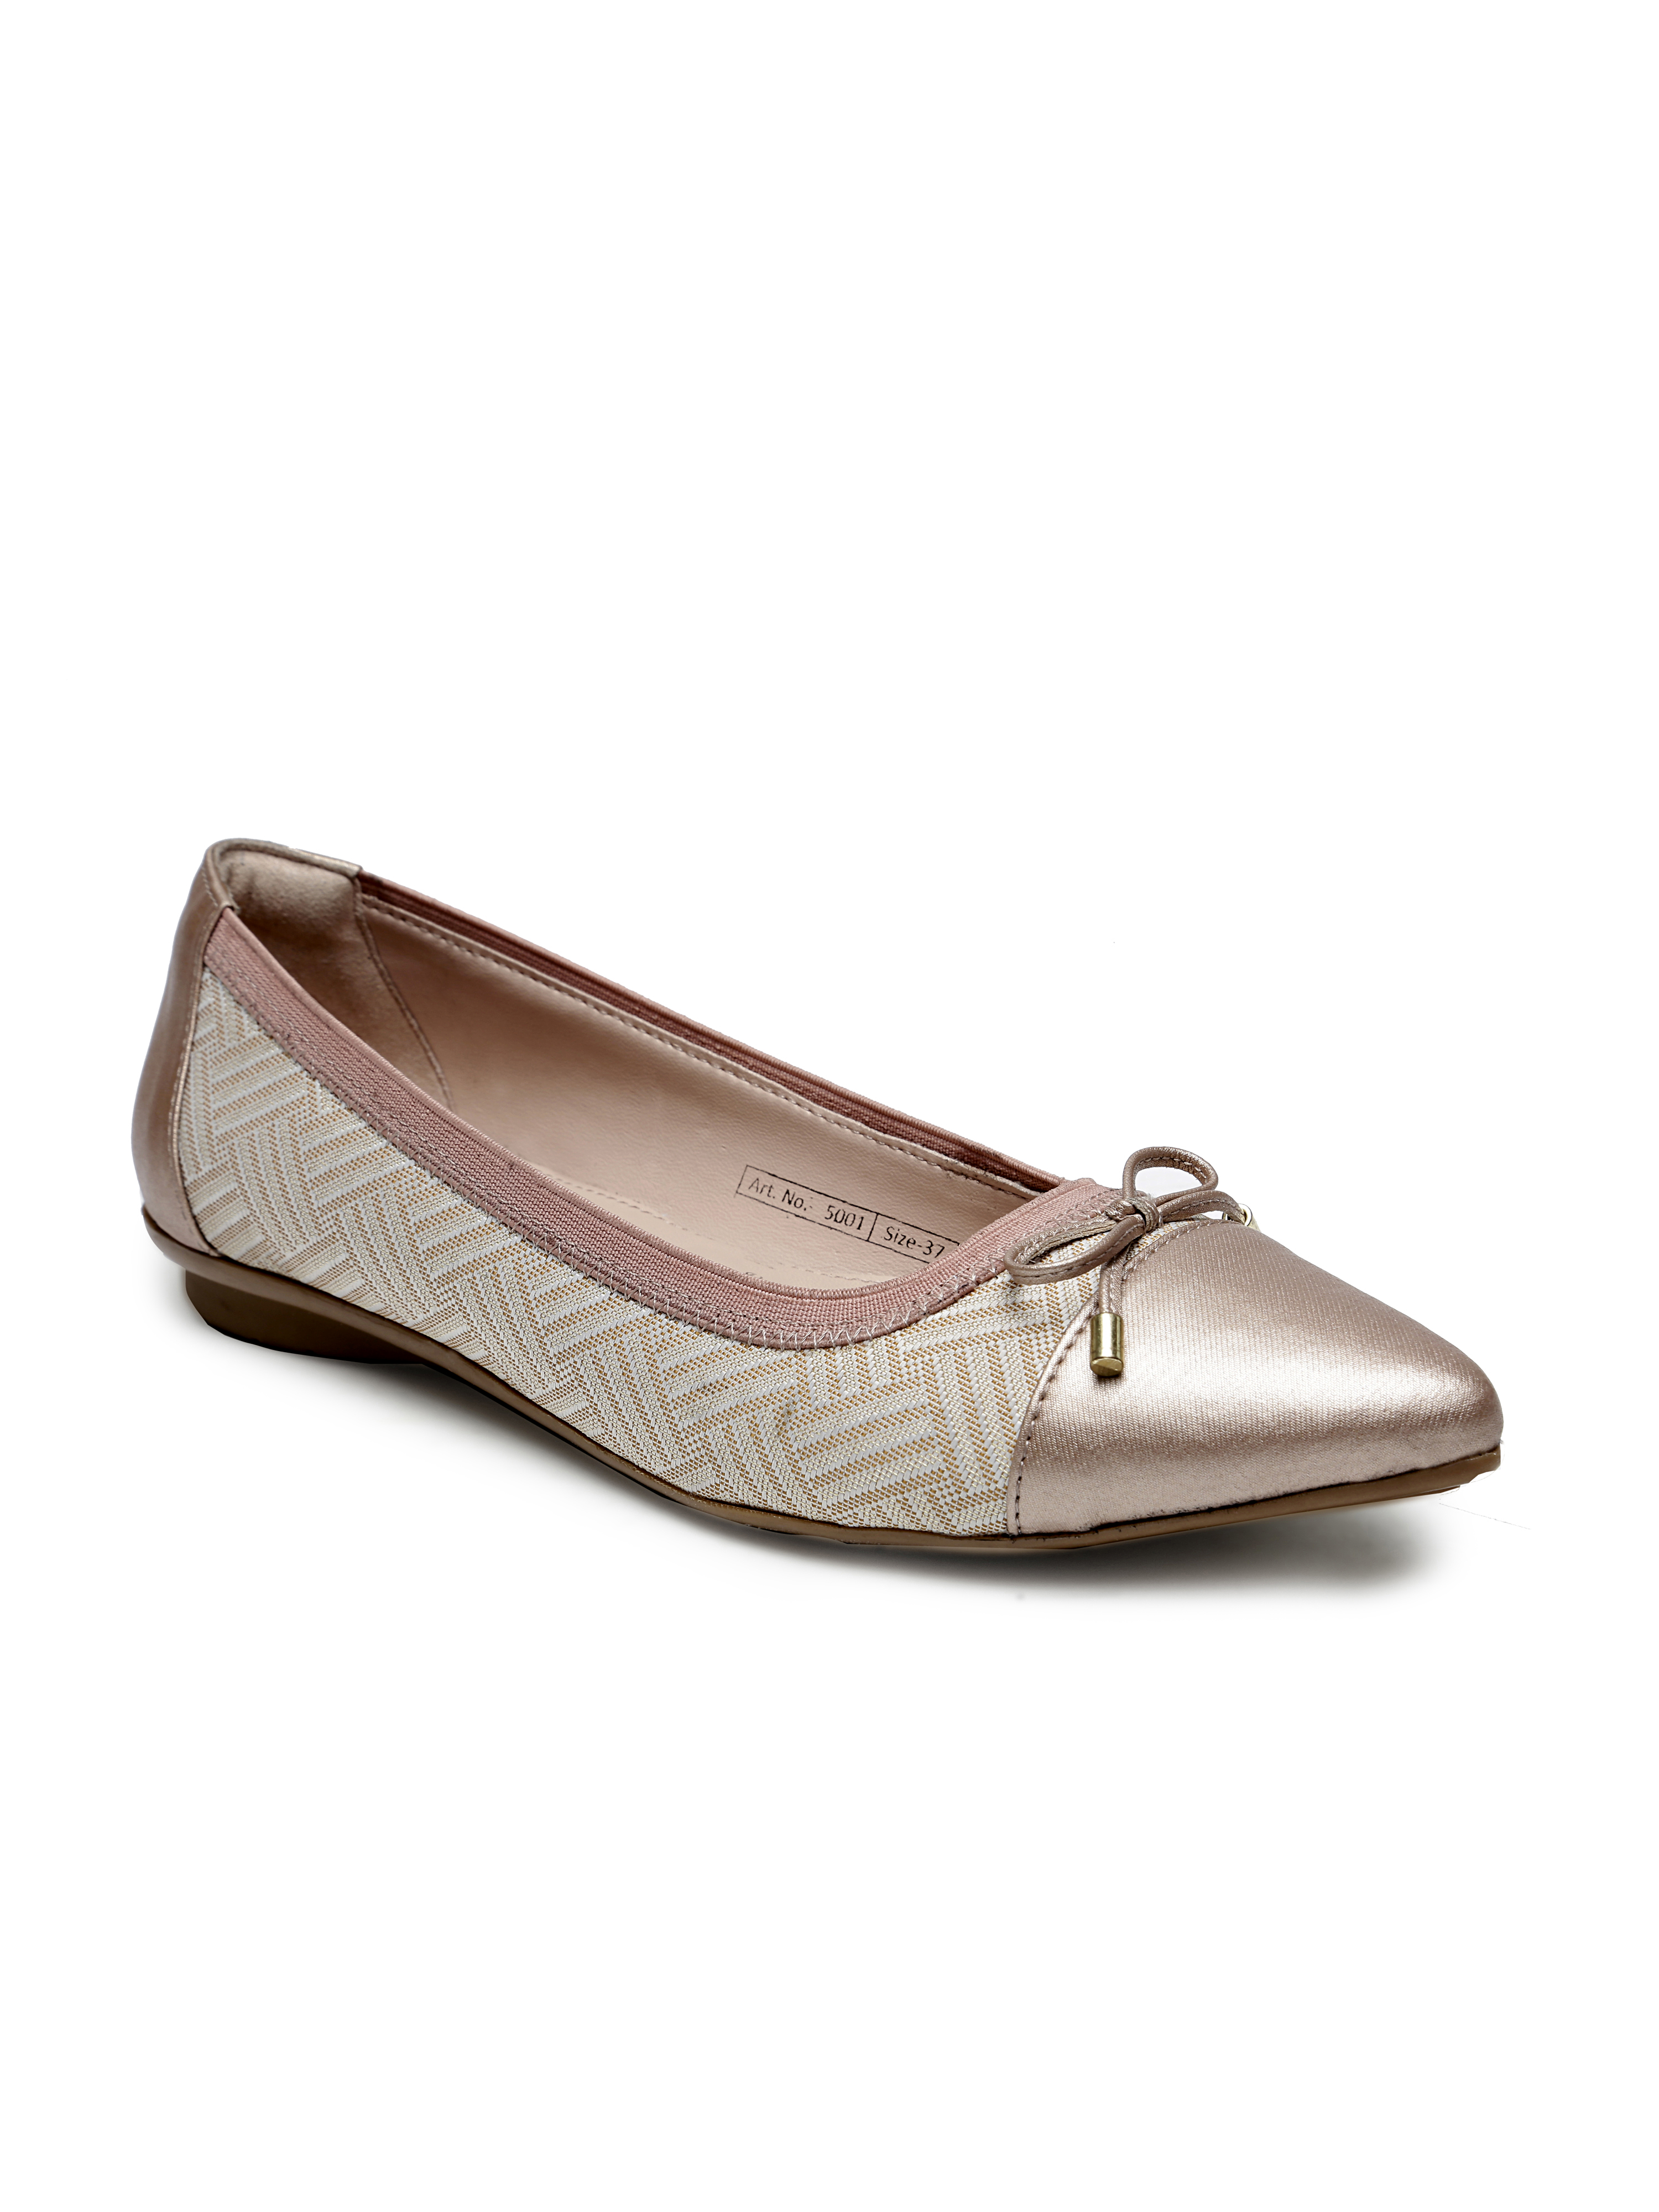 Buy Von Wellx Germany Comfort Women's Peach Casual Shoes Lisa Online in Ahmedabad